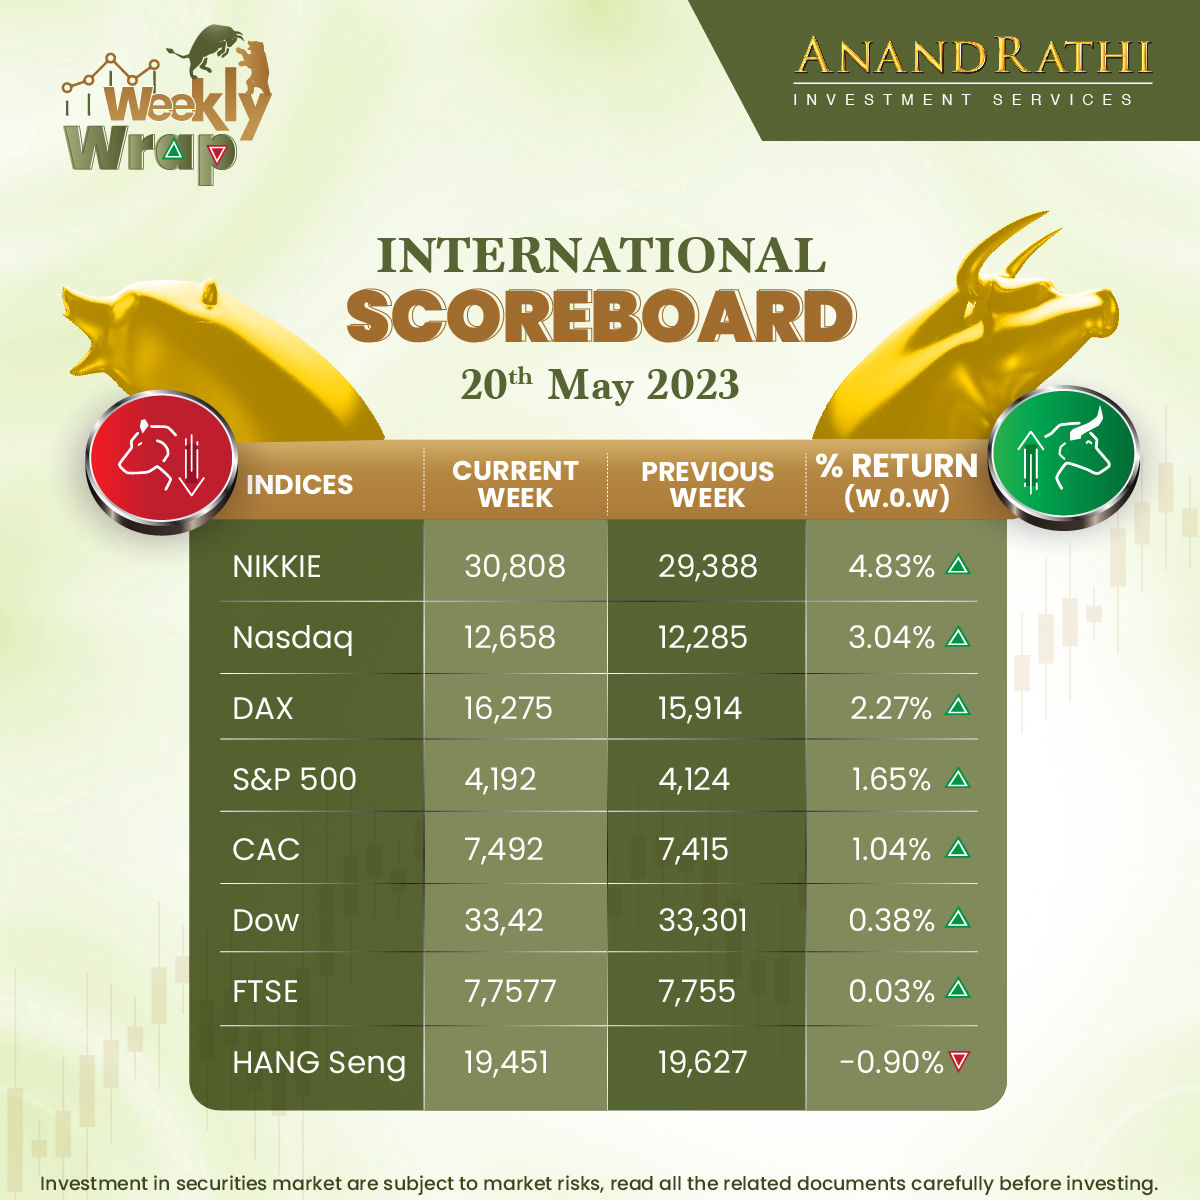 Take a glance at our Weekly Wrap - International Scoreboard 

Disclaimer -  bit.ly/AnandRathiRese…

#WeeklyWrap #anandrathi #stockbroker #stockmarket #commodities #currencies #international #nifty #sense